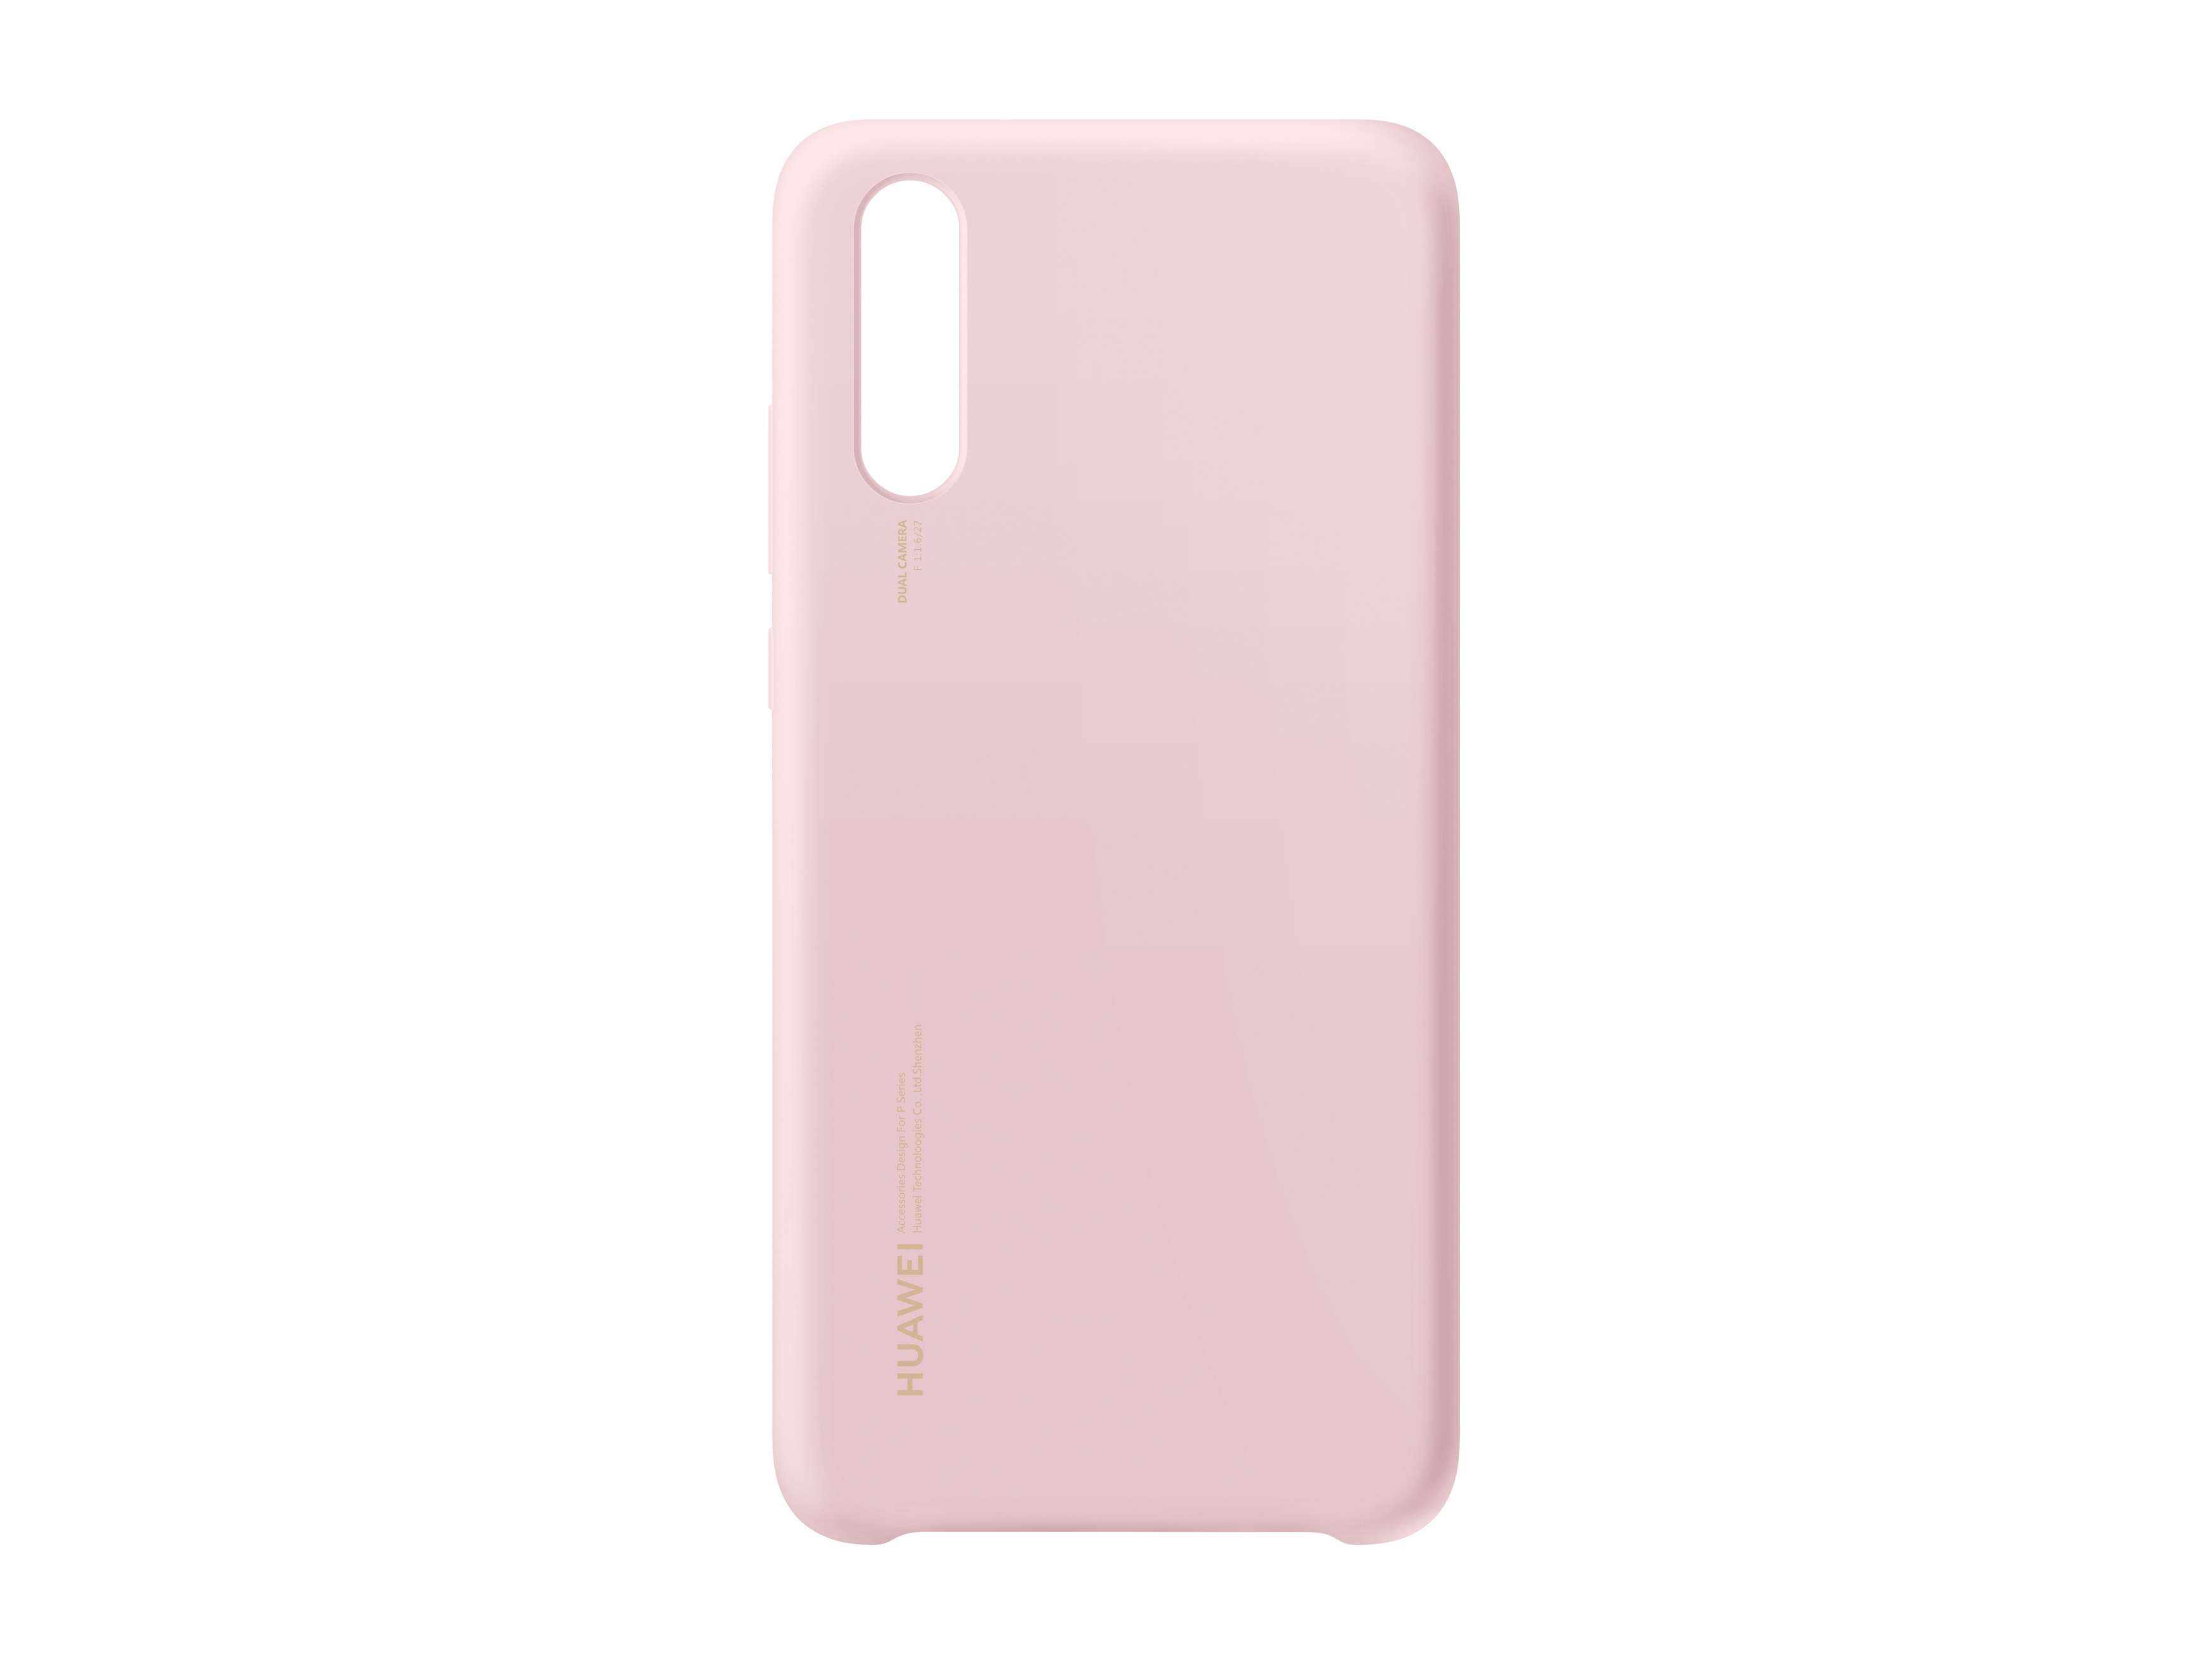 HUAWEI Silicon Case, Backcover, Pink Huawei, P20